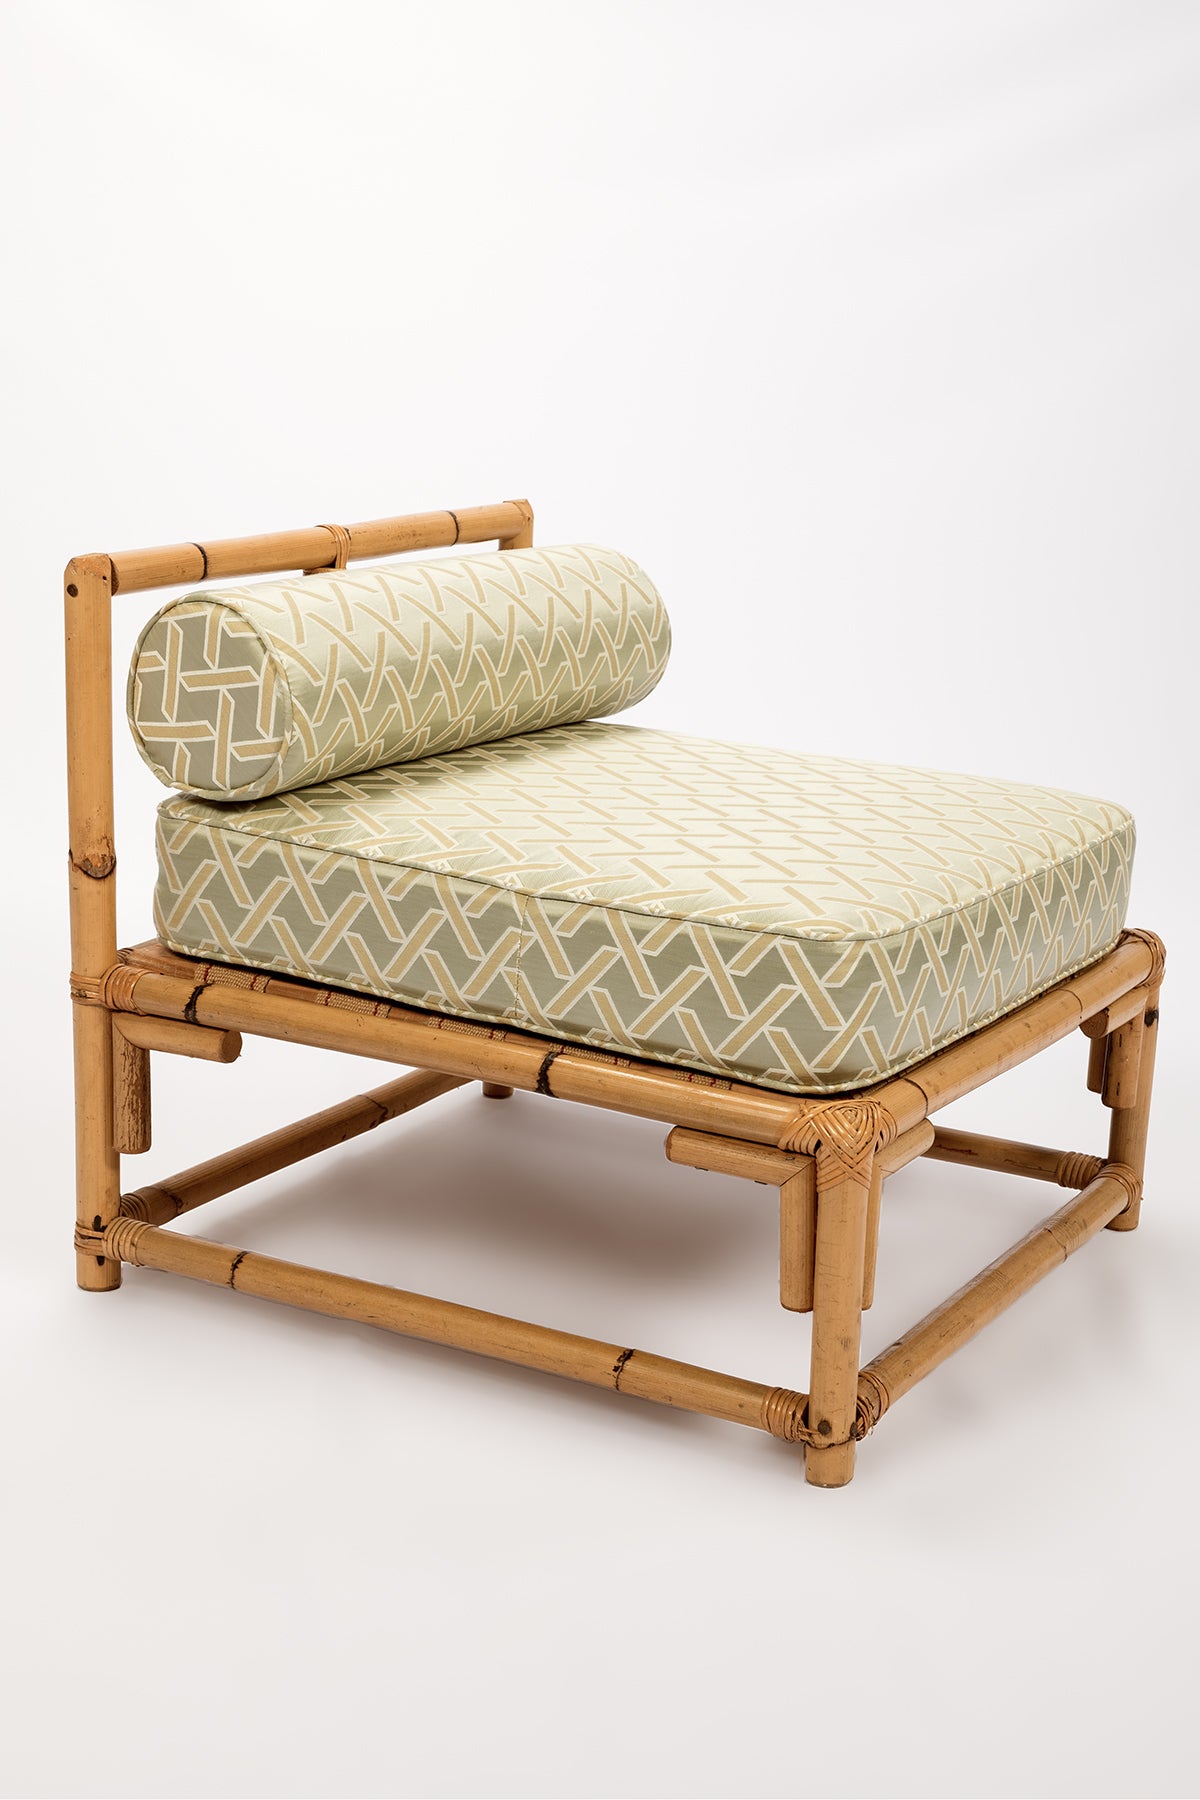 1950s Bamboo Easy Chair (2 Available)